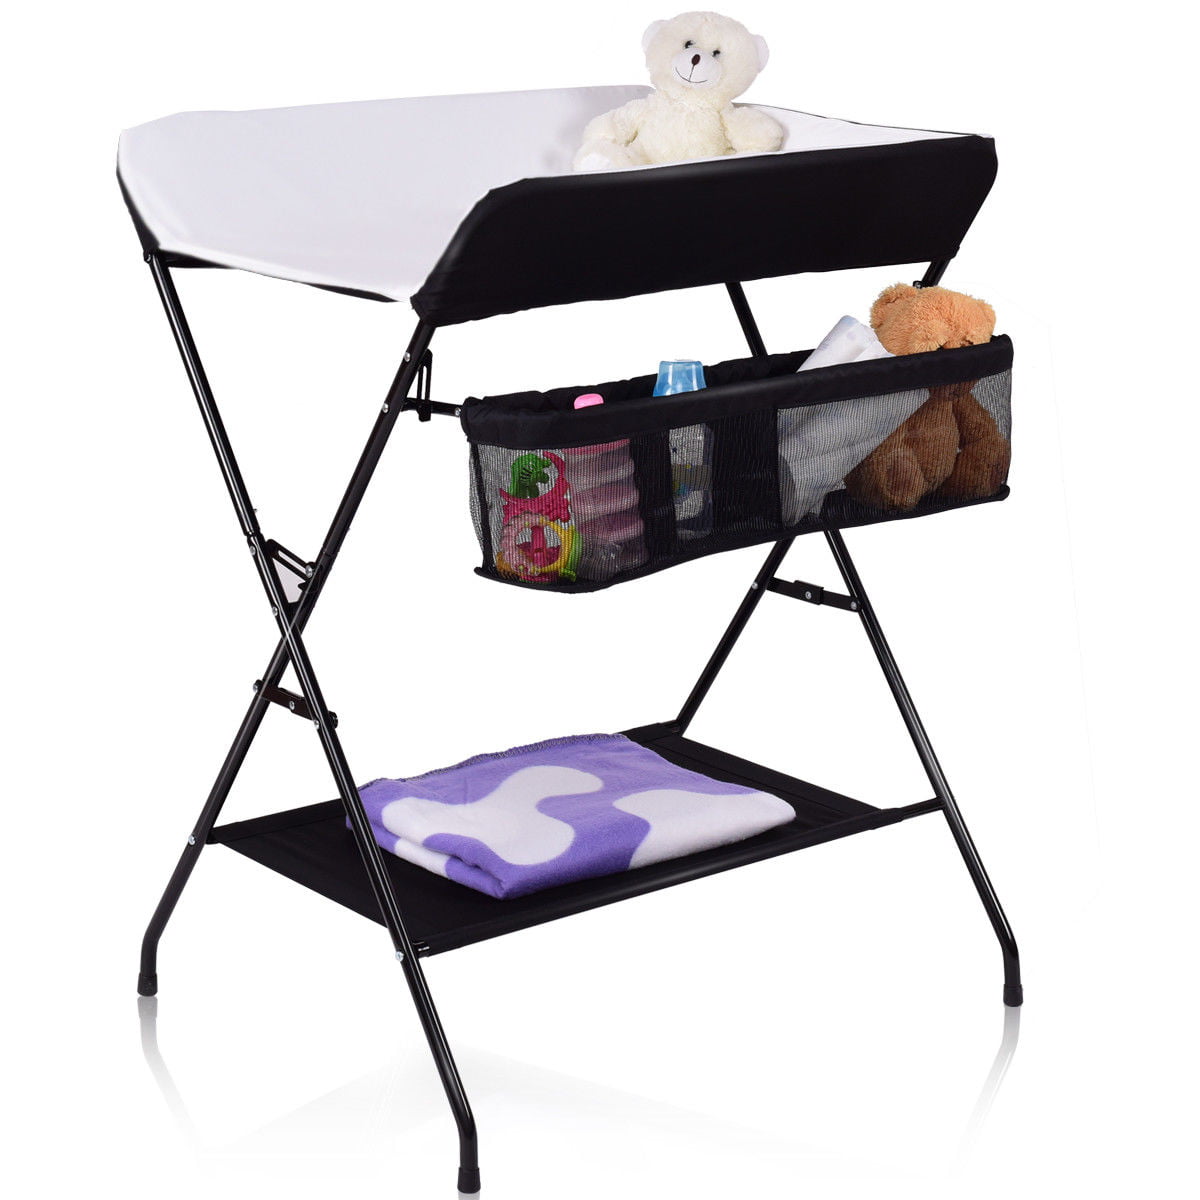 folding diaper changing table